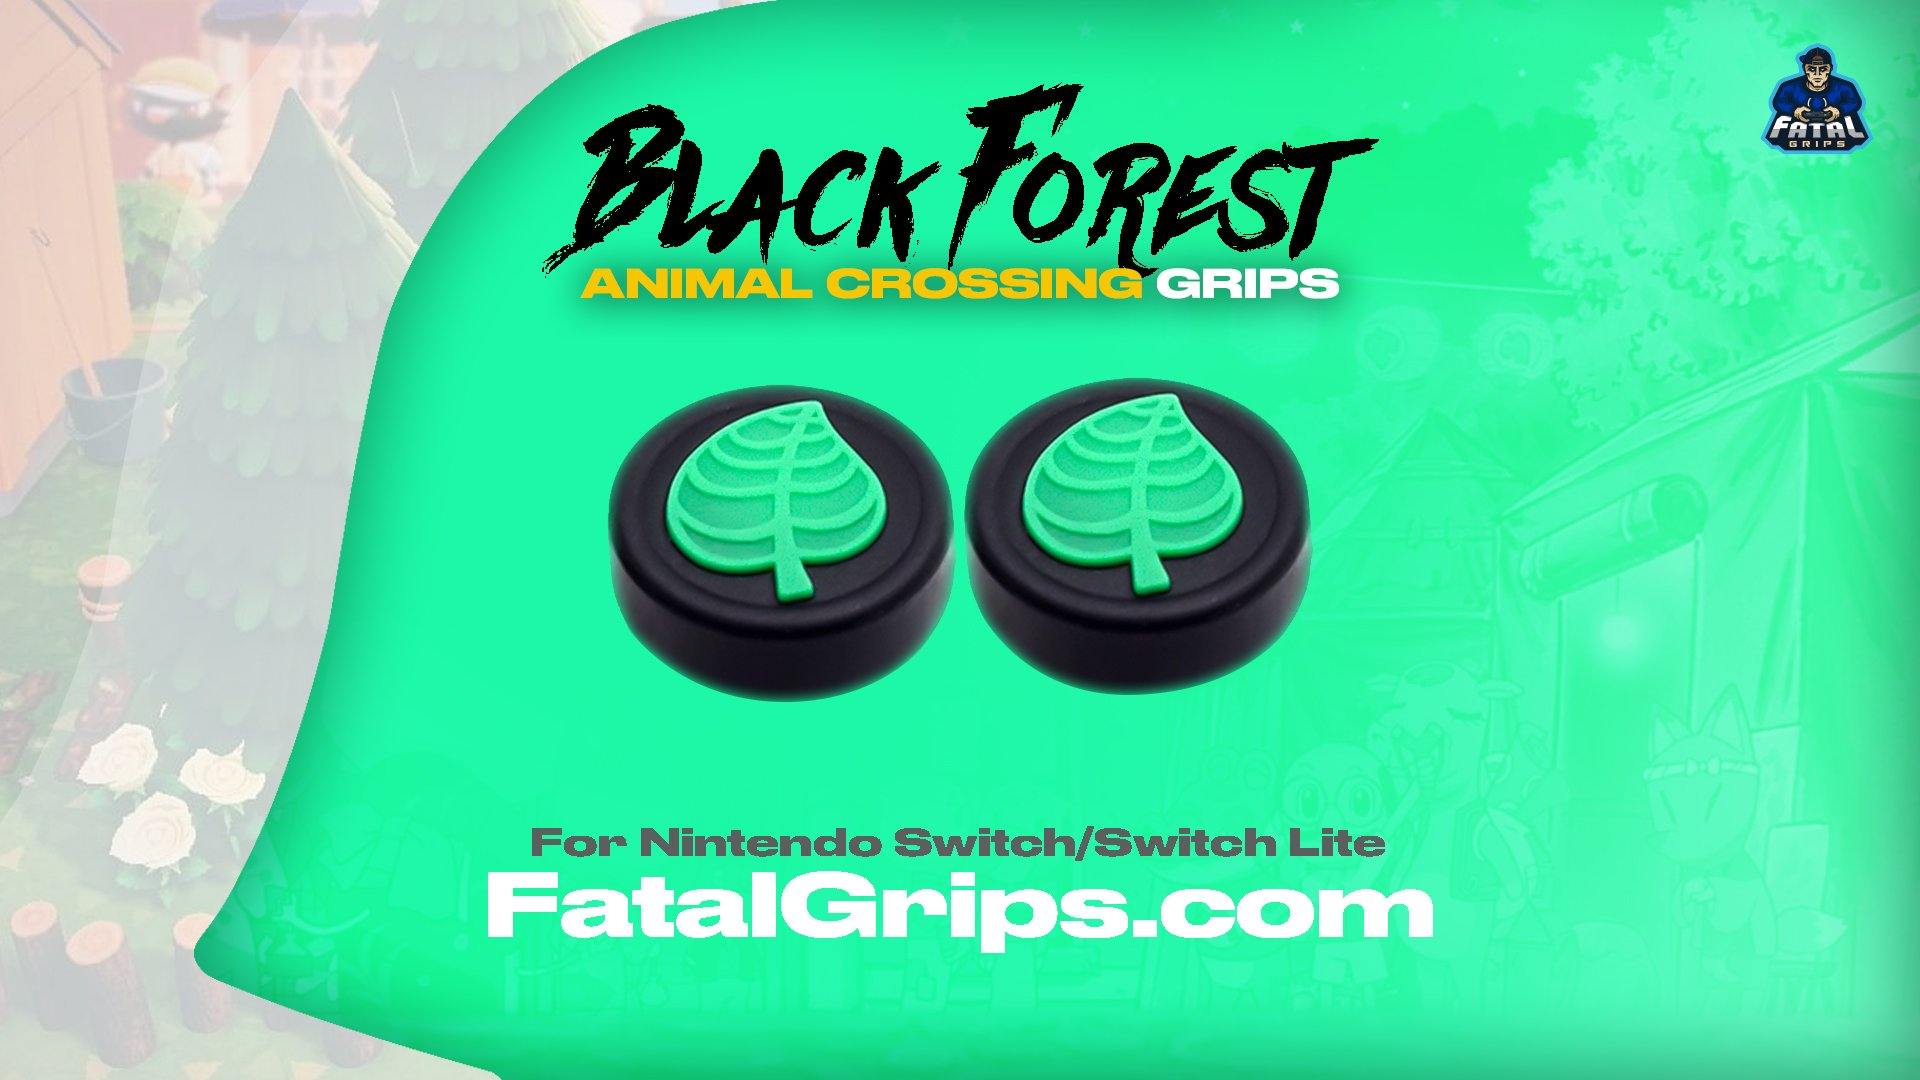 Black Forest Animal Crossing Grips - Fatal Grips